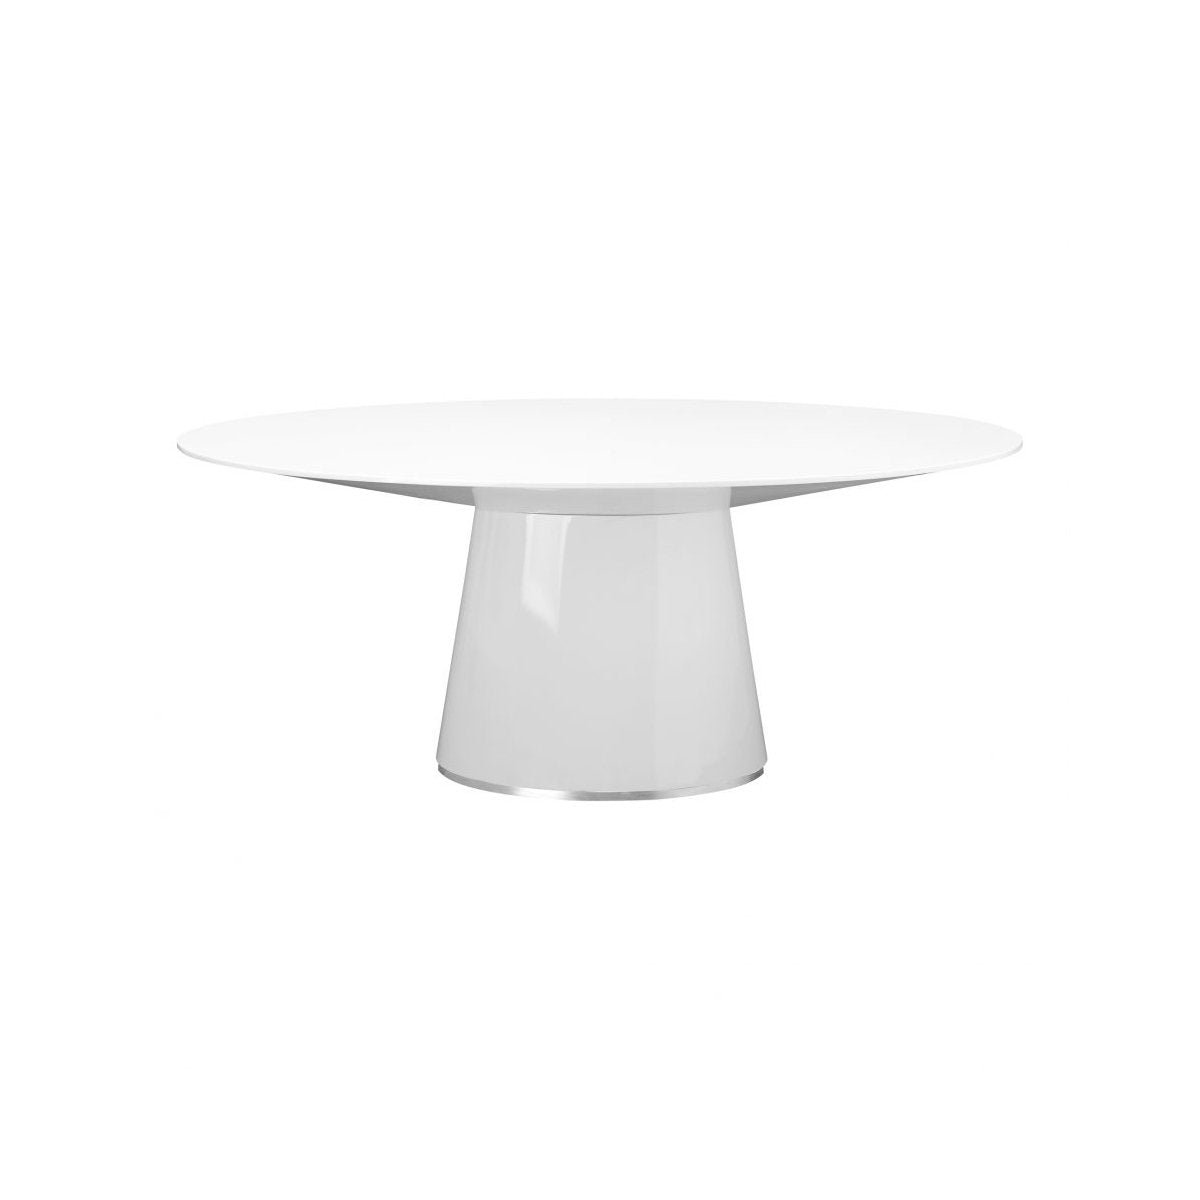 Load image into Gallery viewer, Otago Oval Dining Table WhiteDining Tables Moe&amp;#39;s  White   Four Hands, Burke Decor, Mid Century Modern Furniture, Old Bones Furniture Company, Old Bones Co, Modern Mid Century, Designer Furniture, https://www.oldbonesco.com/
